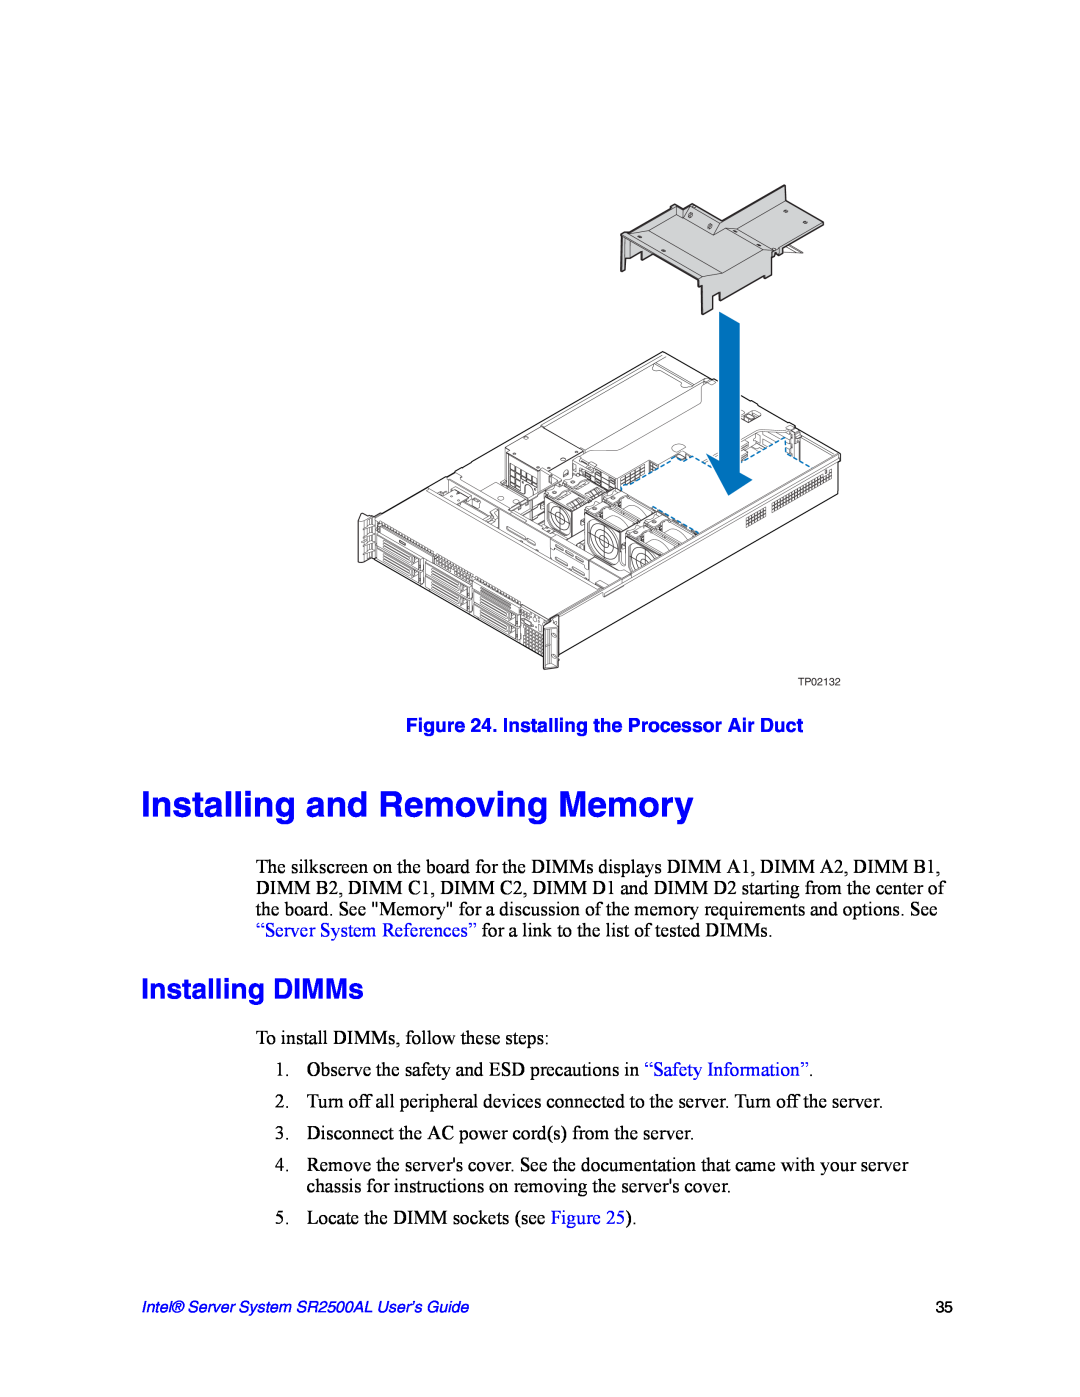 Intel SR2500AL manual Installing and Removing Memory, Installing DIMMs, Installing the Processor Air Duct 